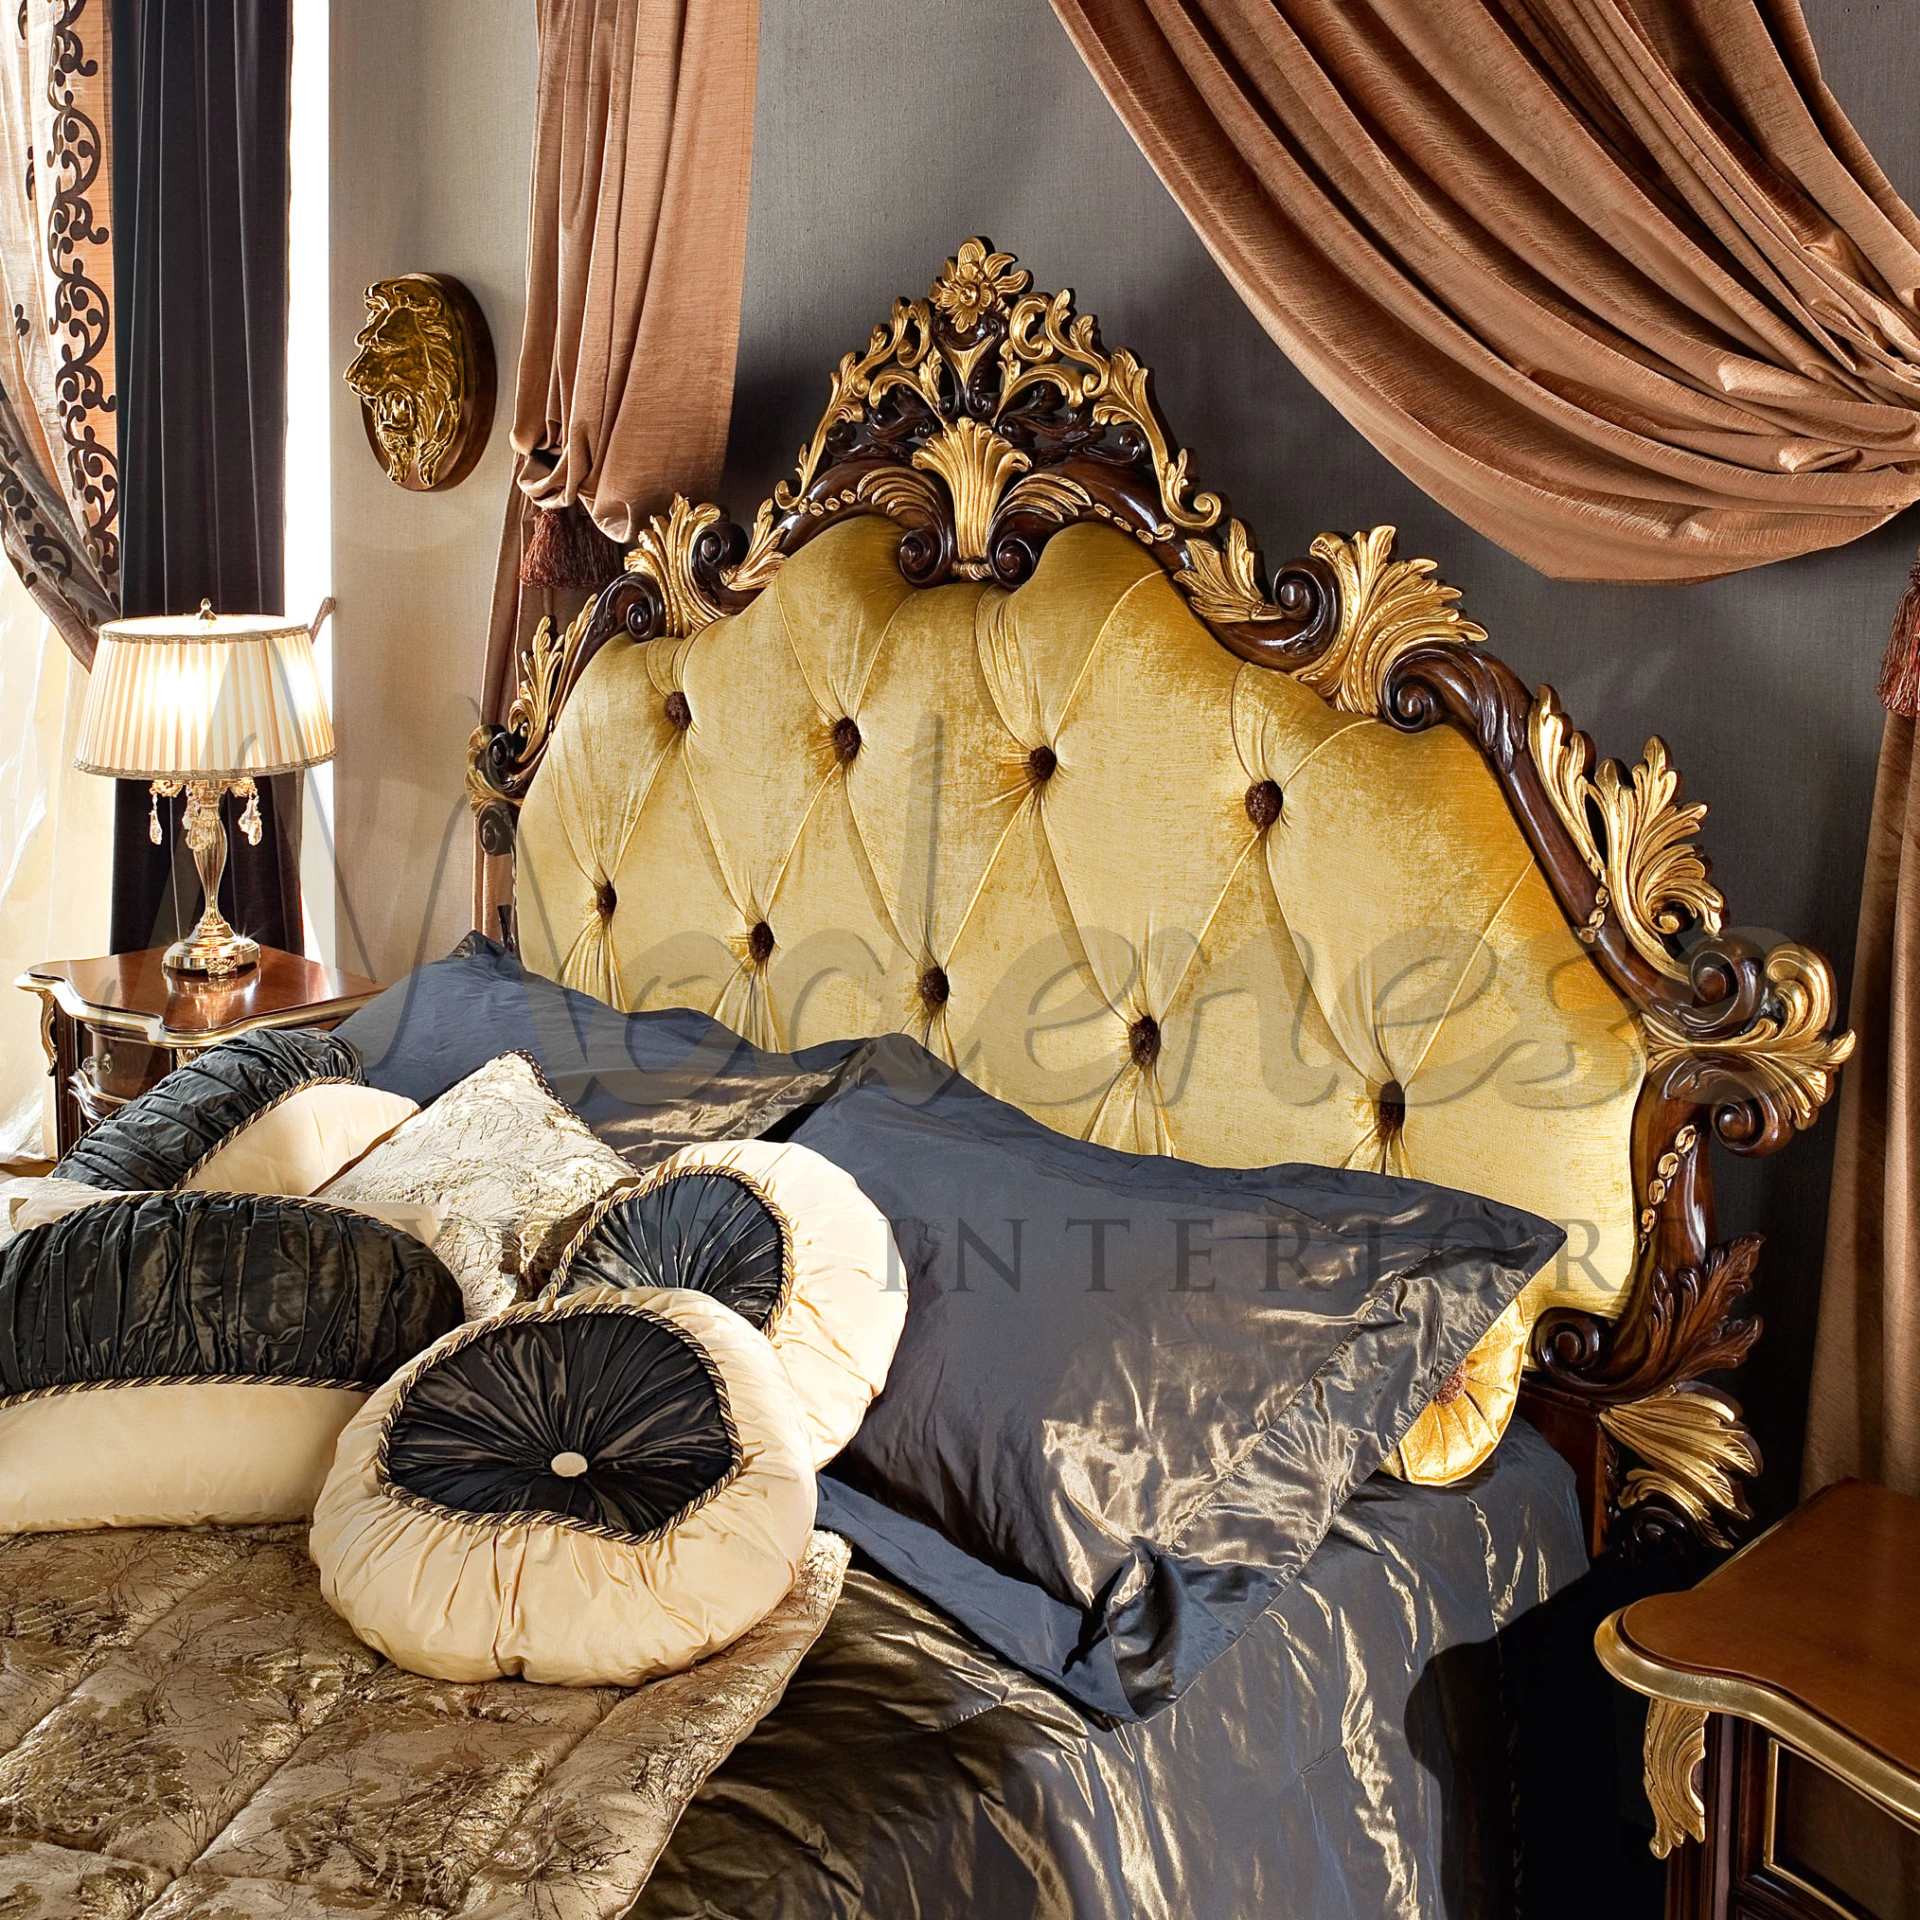 A luxurious bedroom with a golden tufted headboard, detailed dark wooden carvings, draped brown curtains, and elegant bedding with a mix of gold and navy blue pillows.